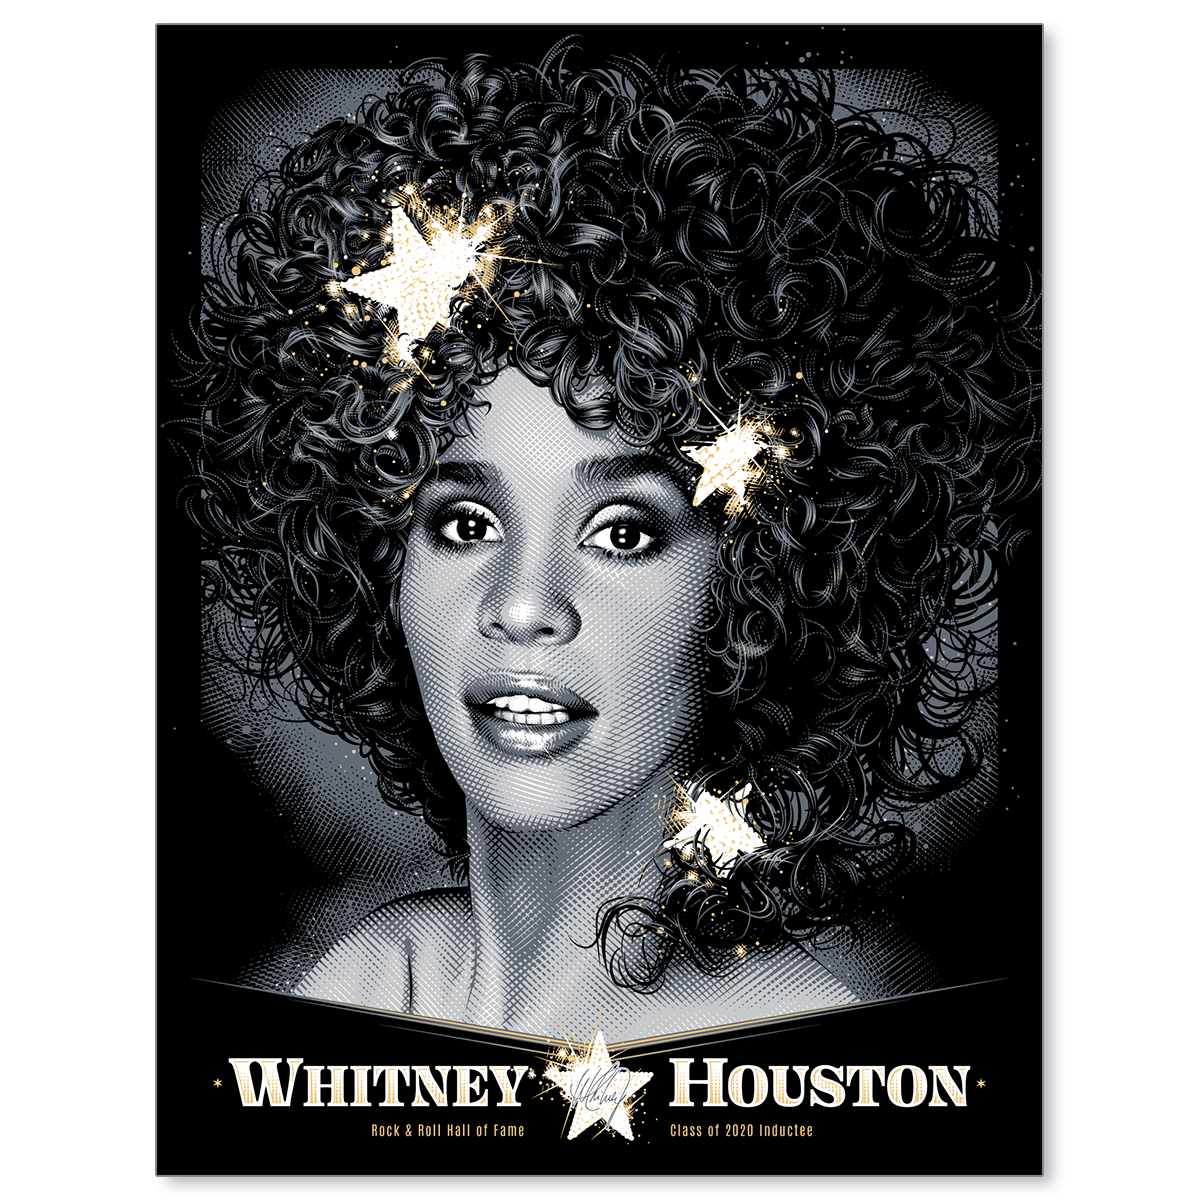 Whitney Houston Hall of Fame by Tracie Ching (Variant Edition)